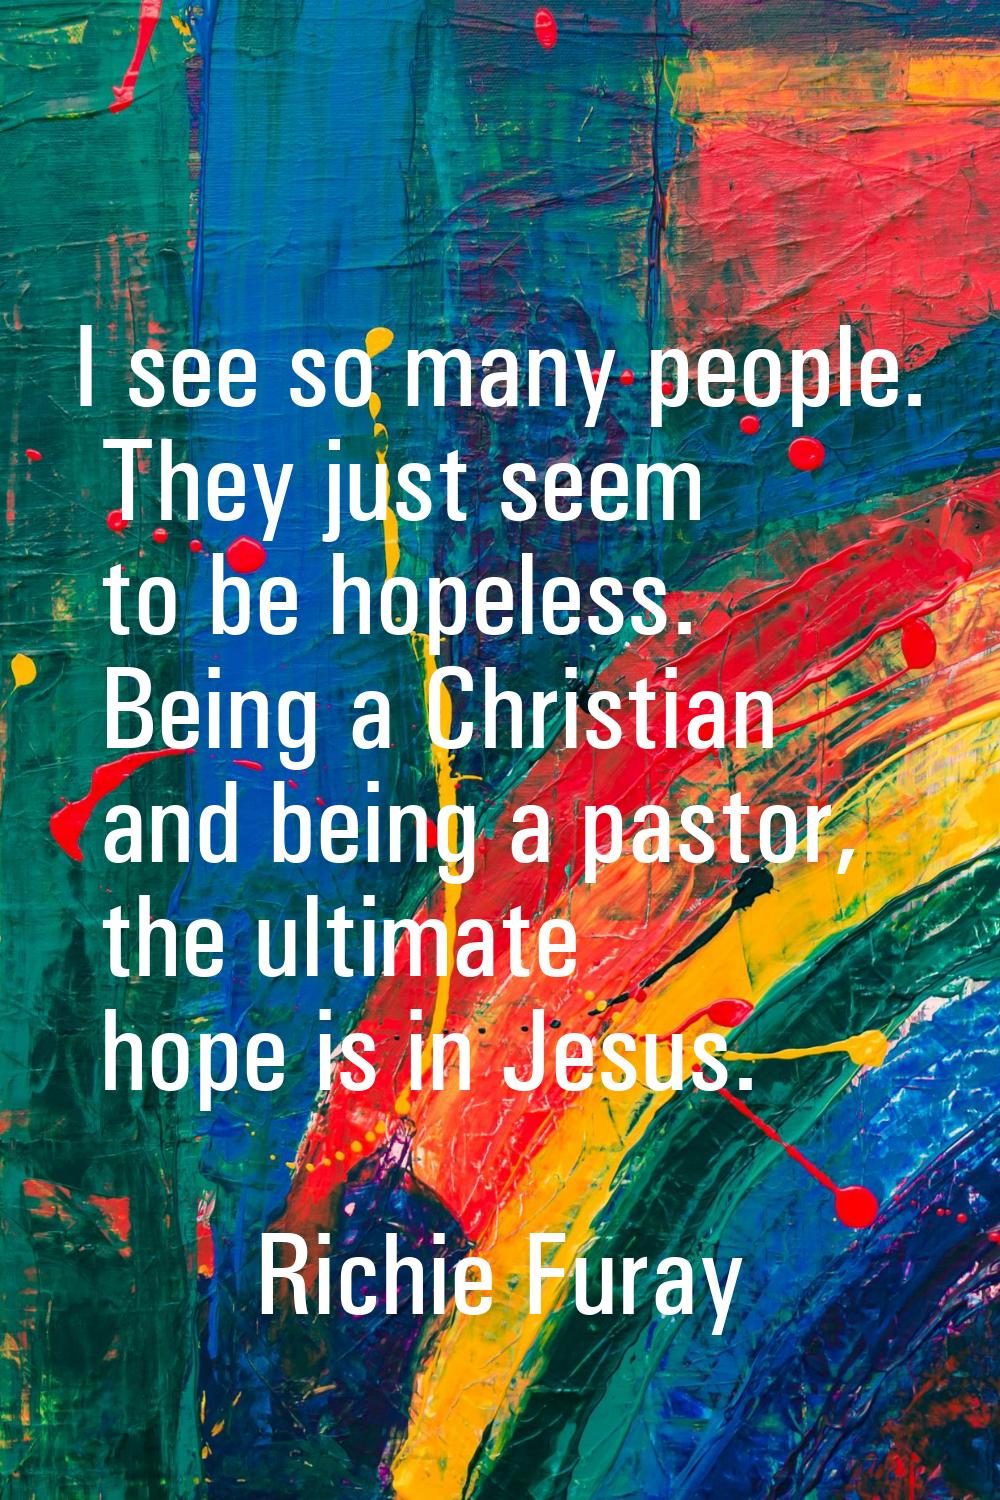 I see so many people. They just seem to be hopeless. Being a Christian and being a pastor, the ulti